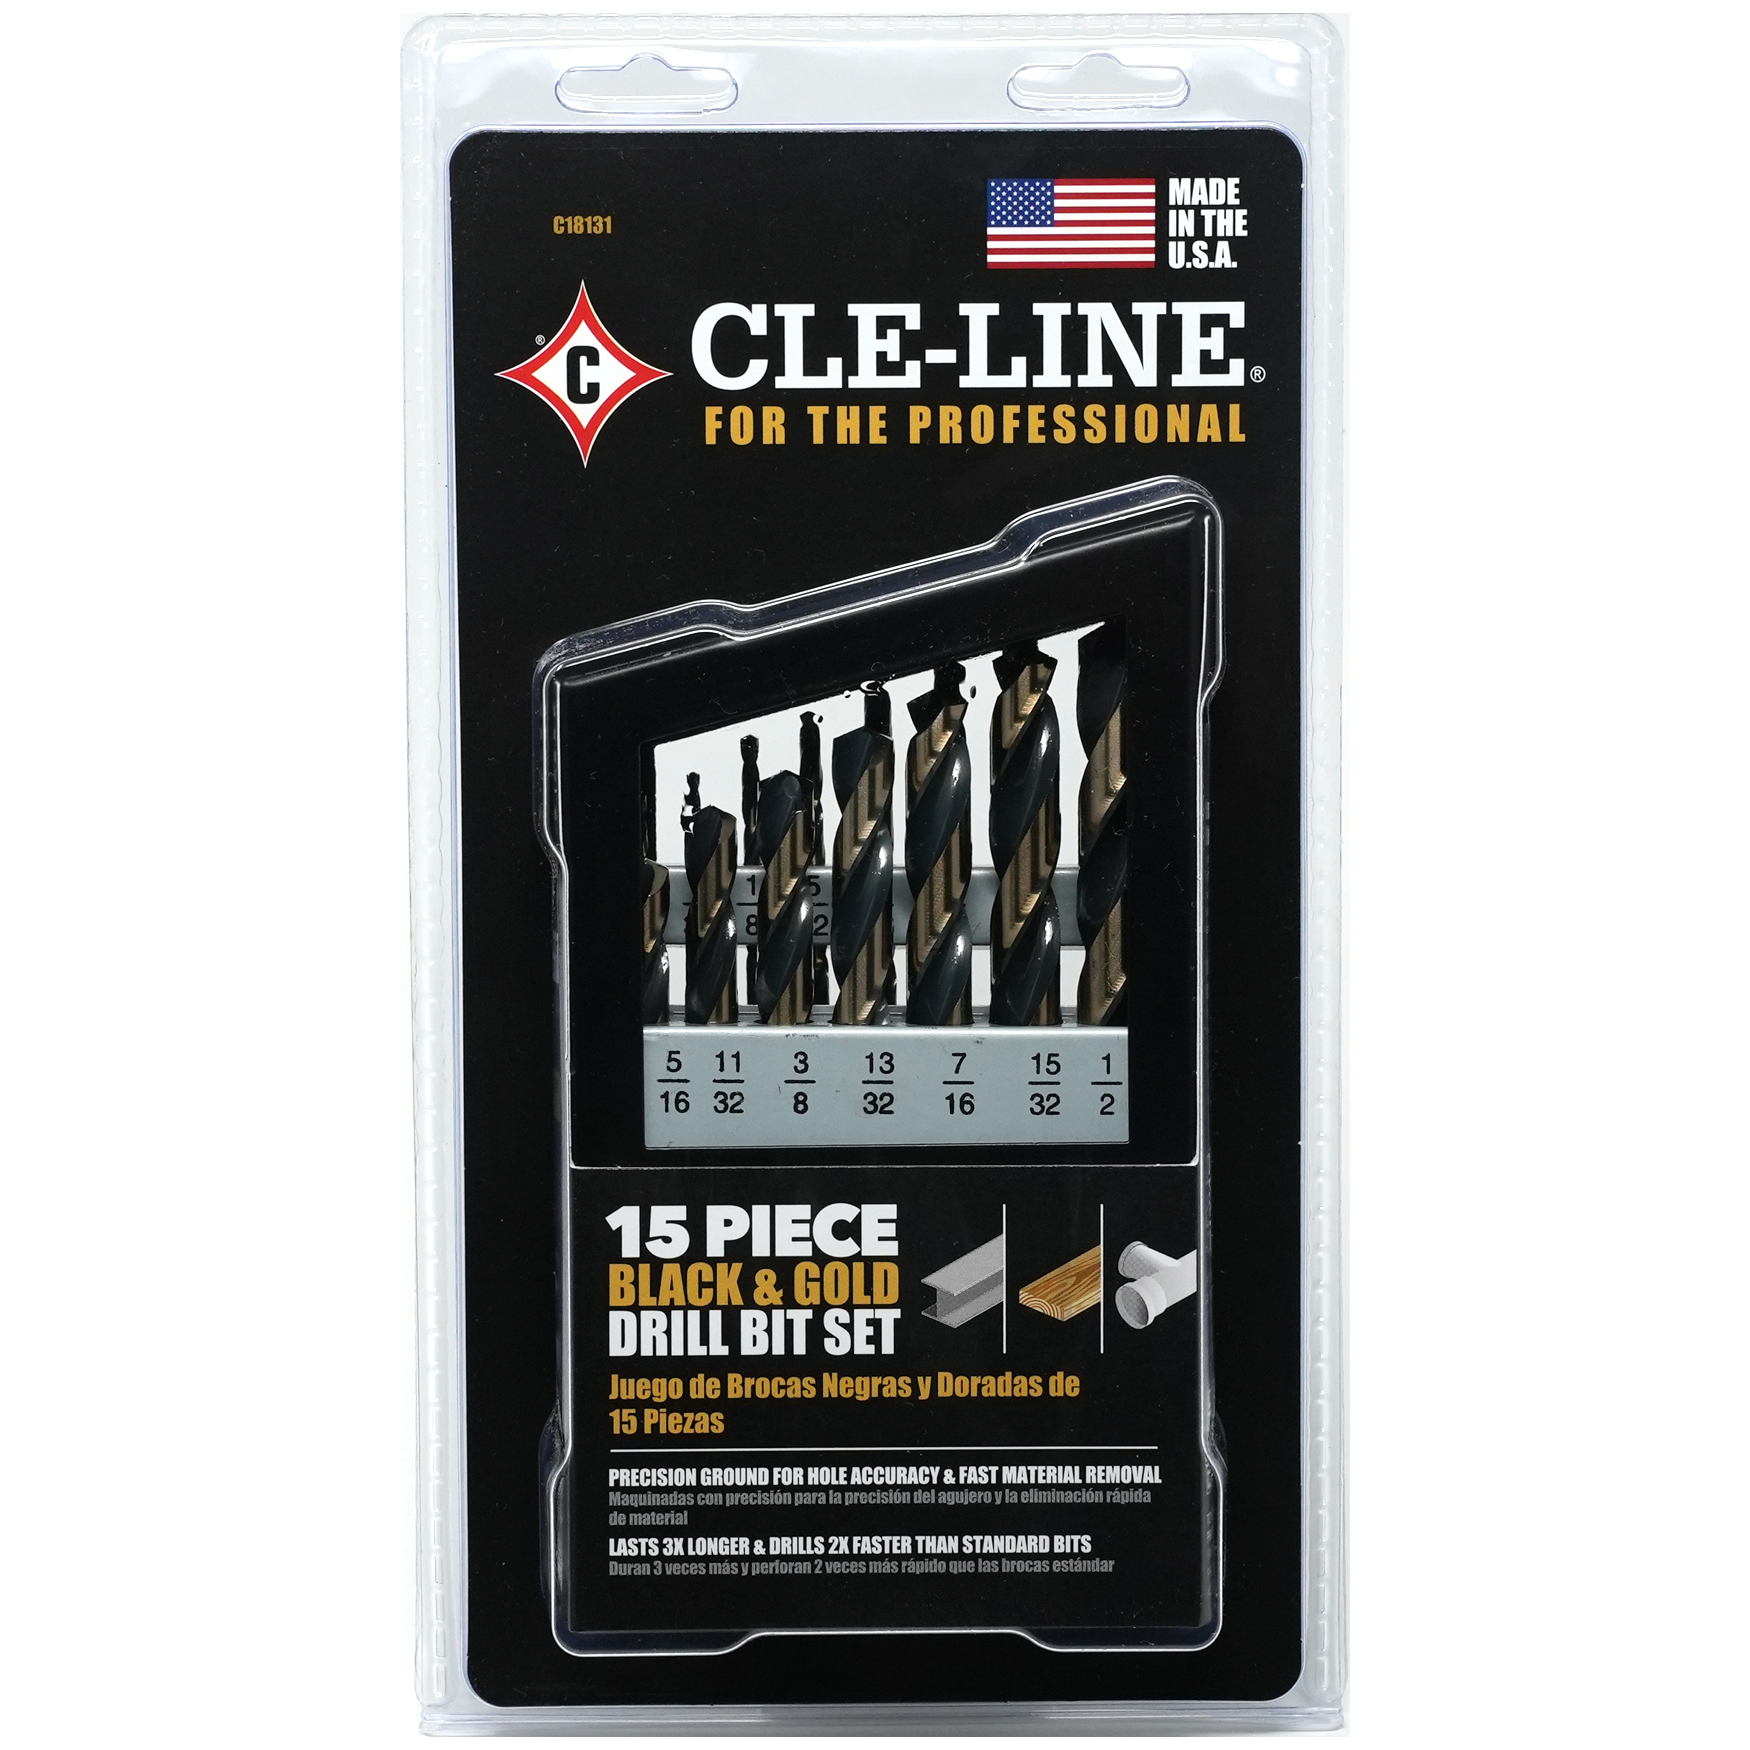 are cle-line drill bits good? 2